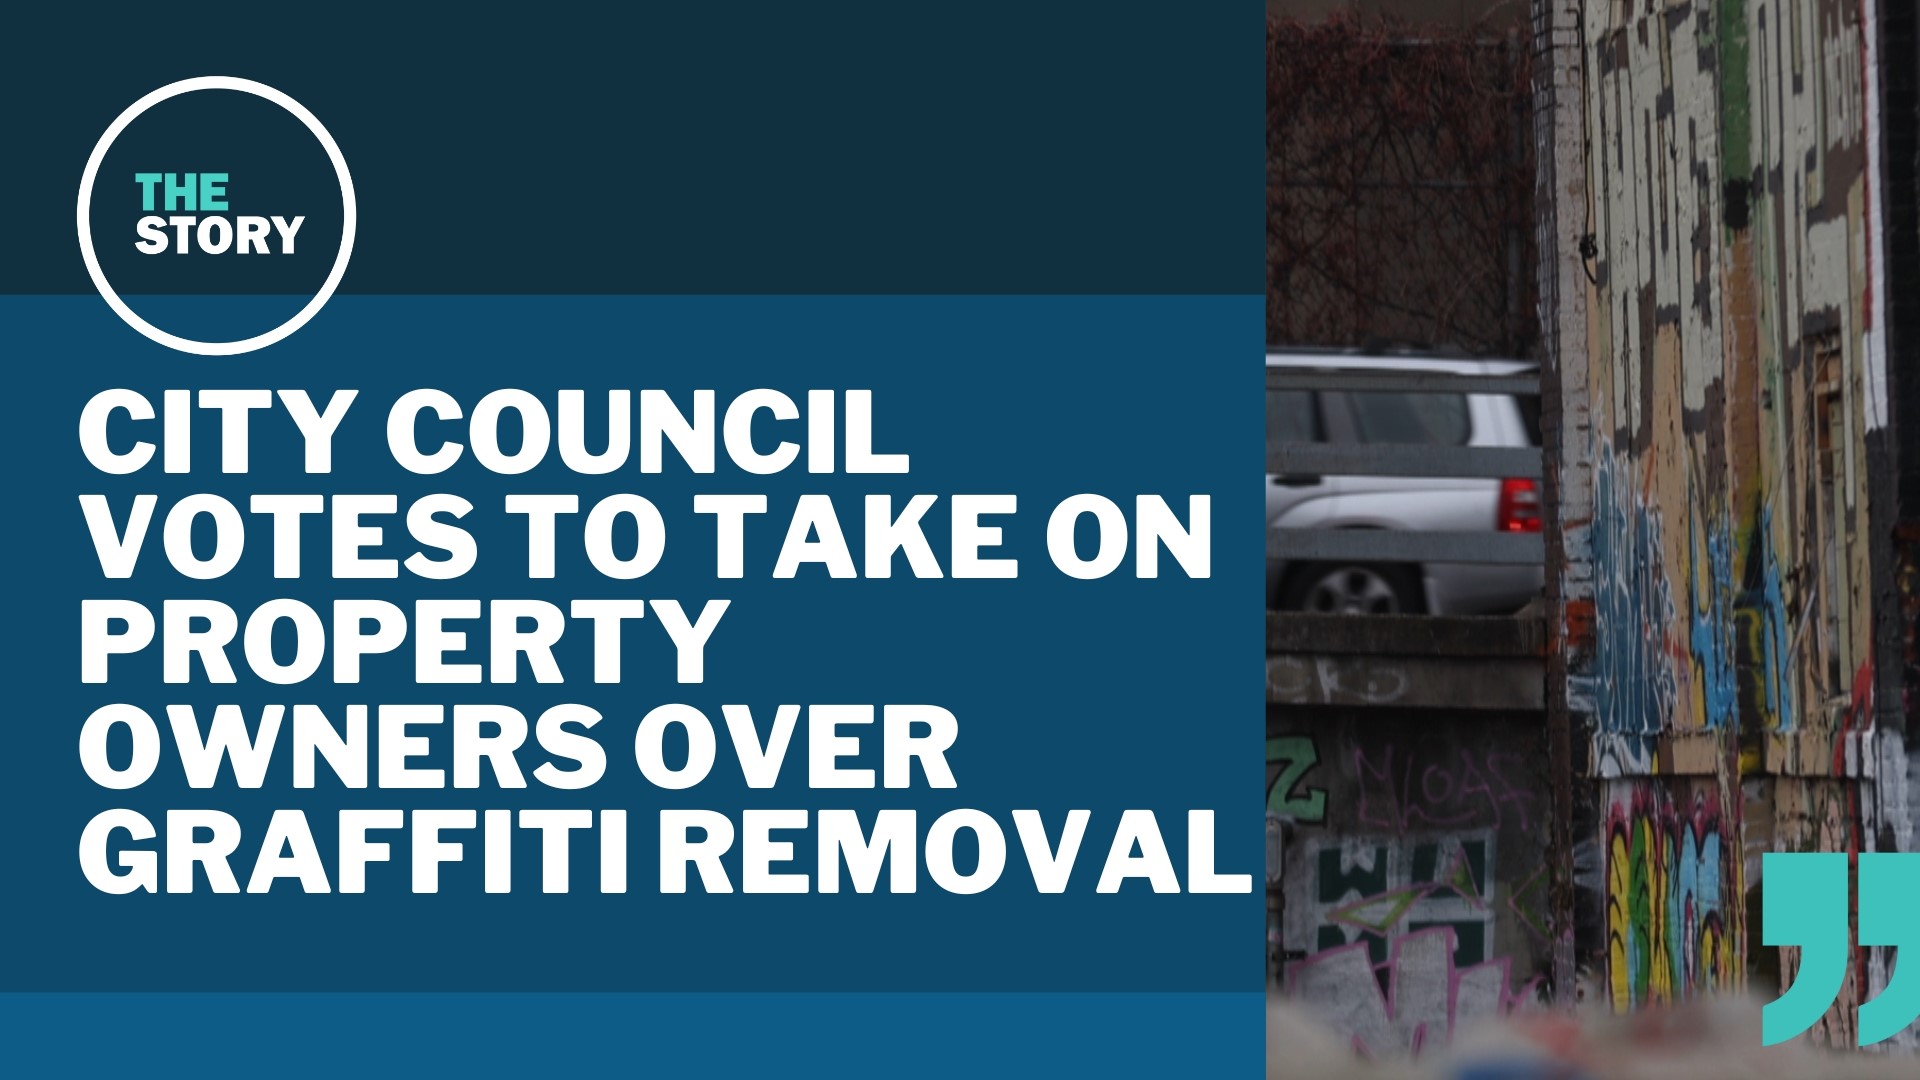 Commissioner Carmen Rubio, who brought the ordinance, said that it's primarily for some property owners who don't cooperate with the city on clean-up.